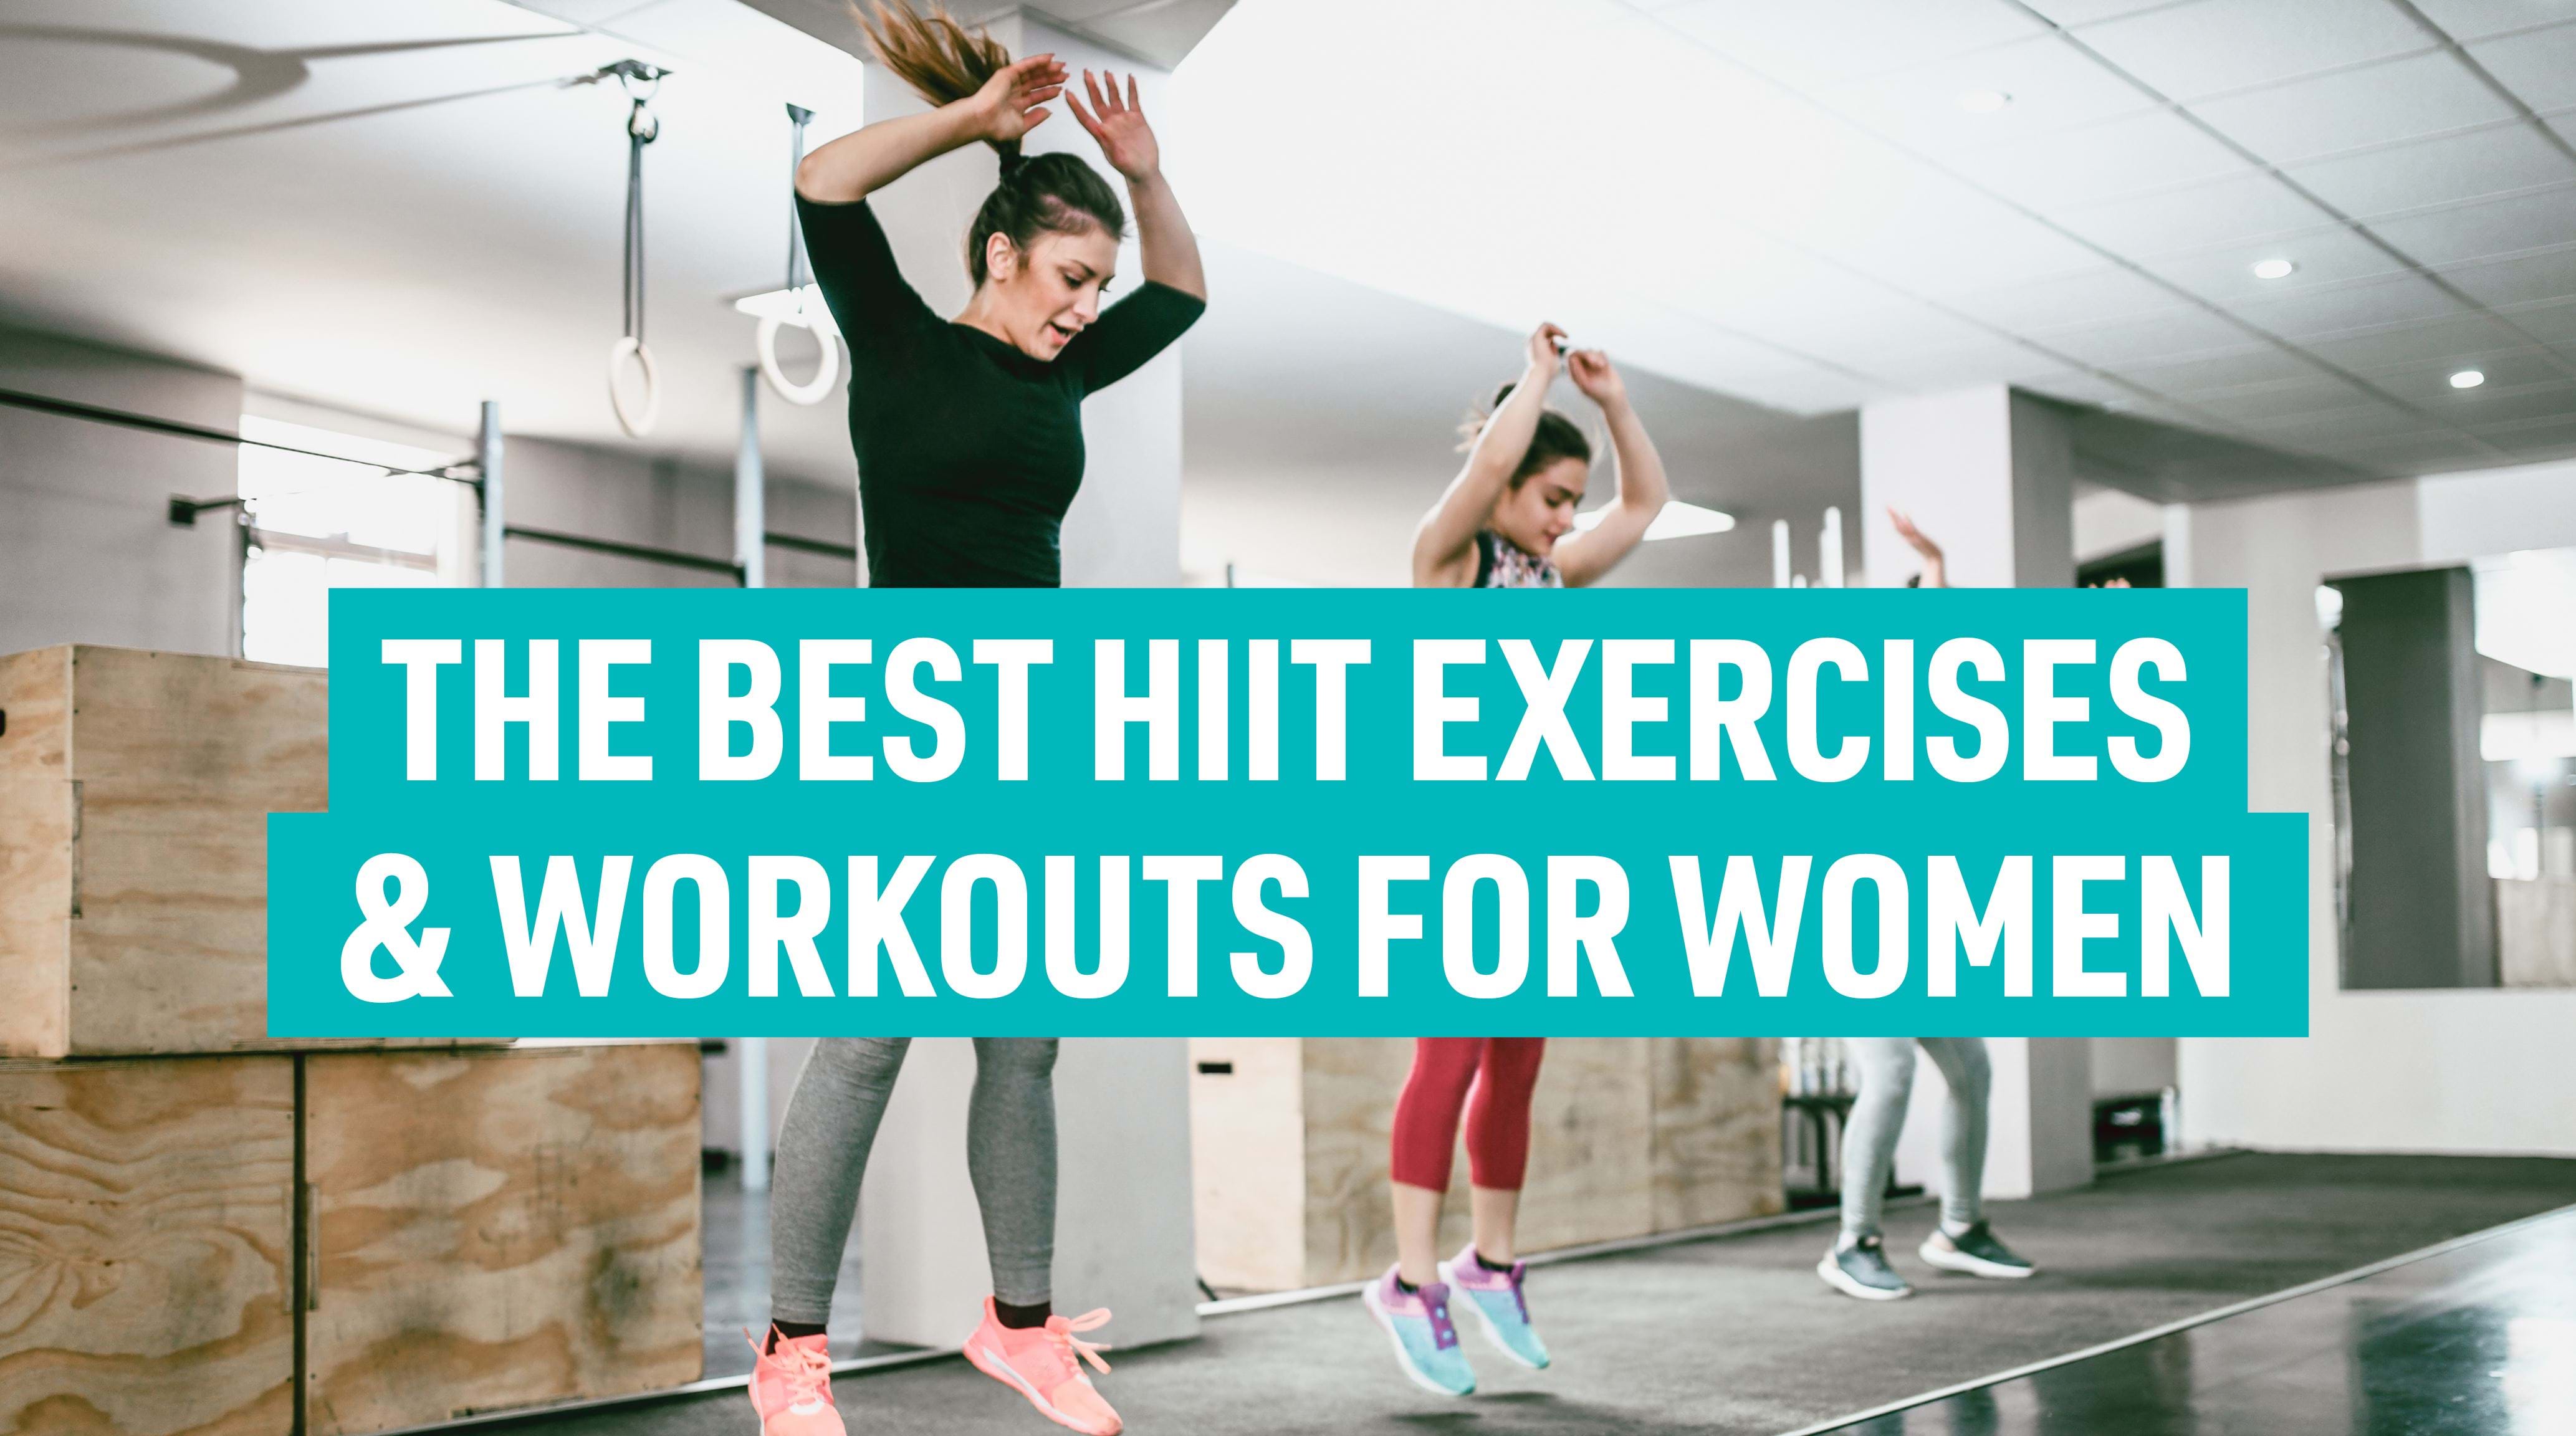 The Best HIIT Exercises & Workouts for Women